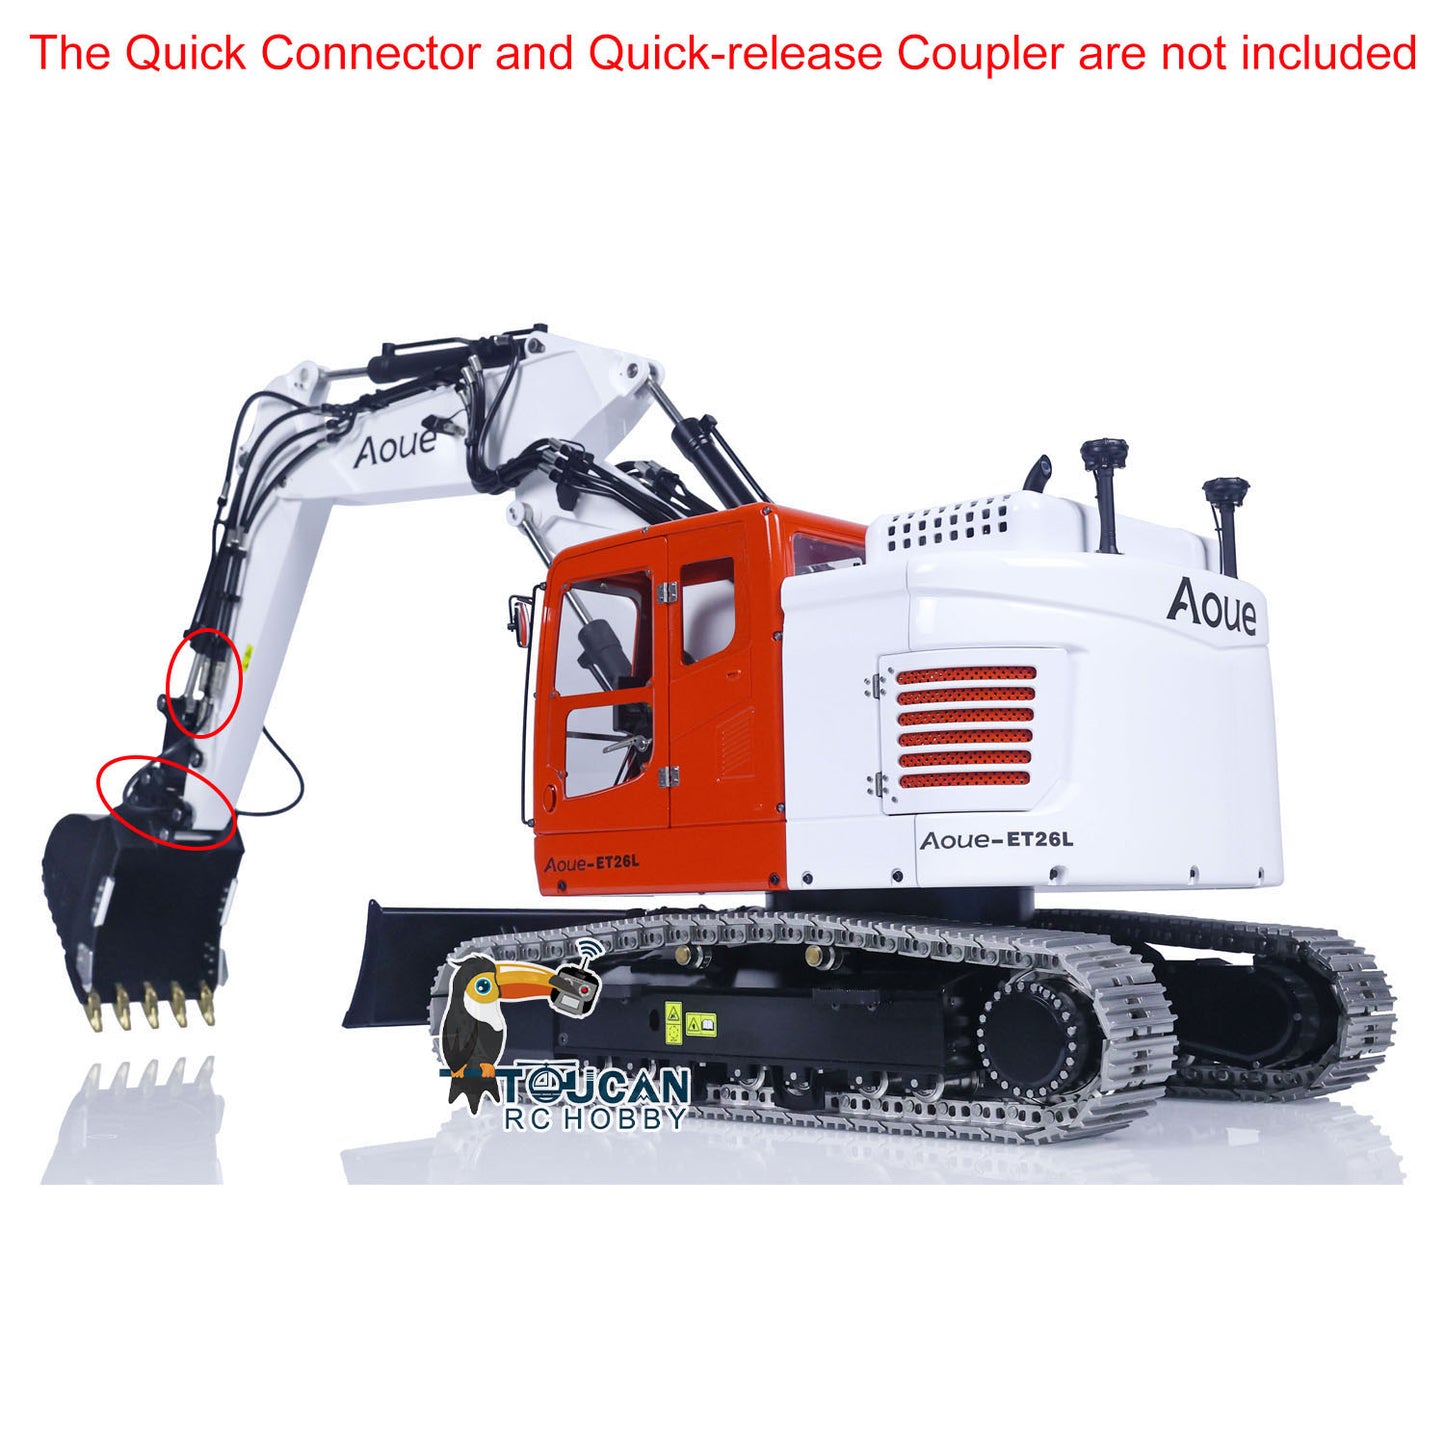 LESU Metal Aoue ET26L 1/14 Hydraulic RC Excavator Assembled Painted Radio Control Digger Hobby Model Emulated Contruction Vehicle